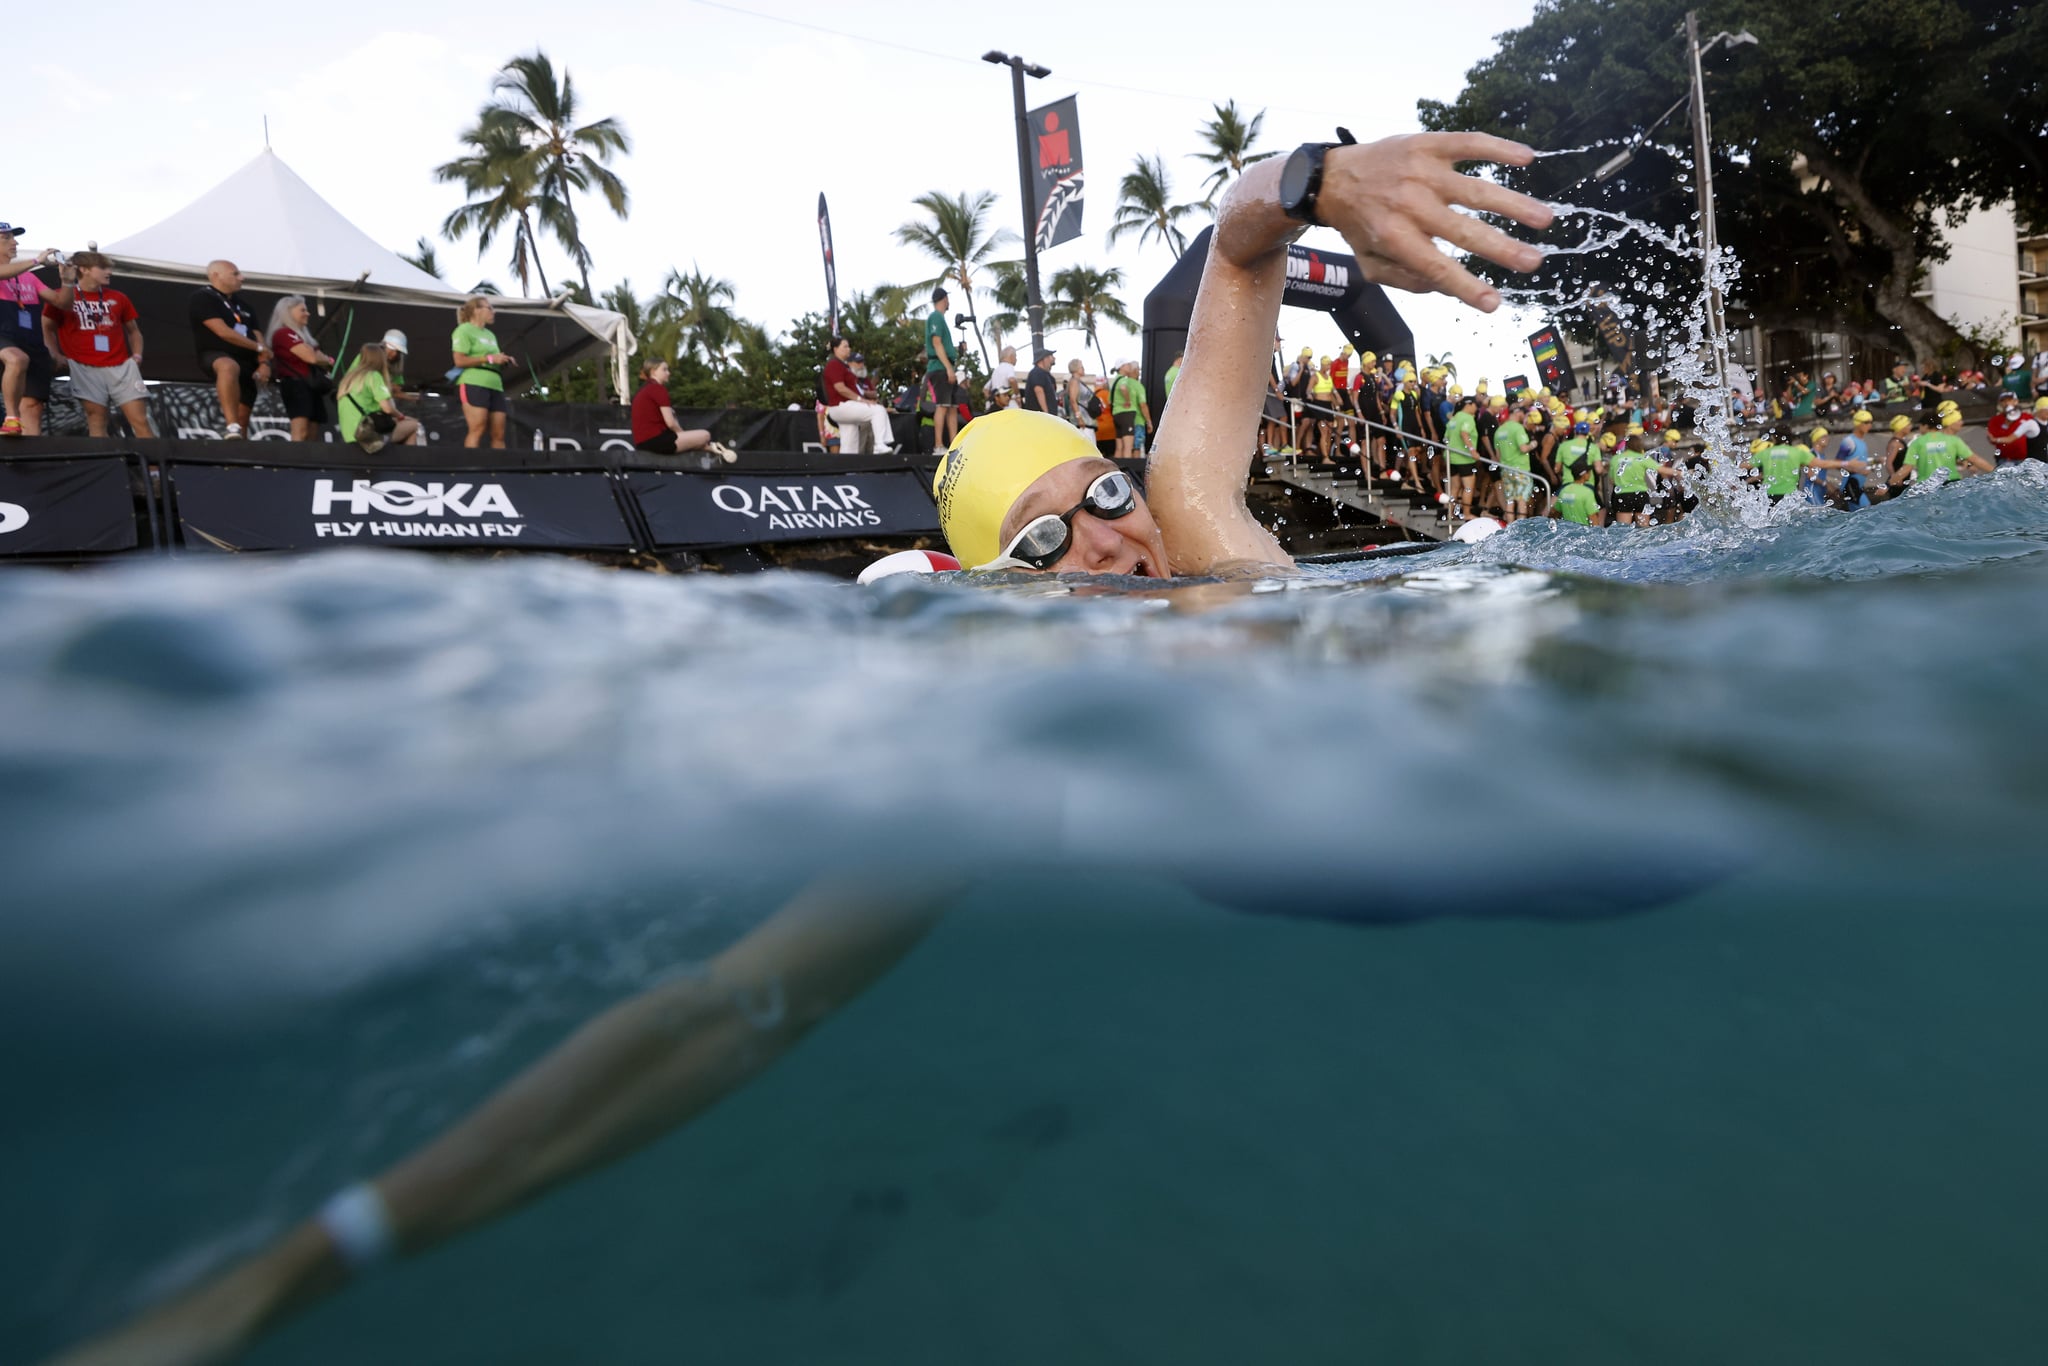 KAILUA KONA, HAWAII - OCTOBER 14: (EDITORS NOTE: Image taken using an underwater camera.) An athlete competes during the swim portion during the VinFast IRONMAN World Championship on October 14, 2023 in Kailua Kona, Hawaii. (Photo by Sean M. Haffey/Getty Images for IRONMAN)